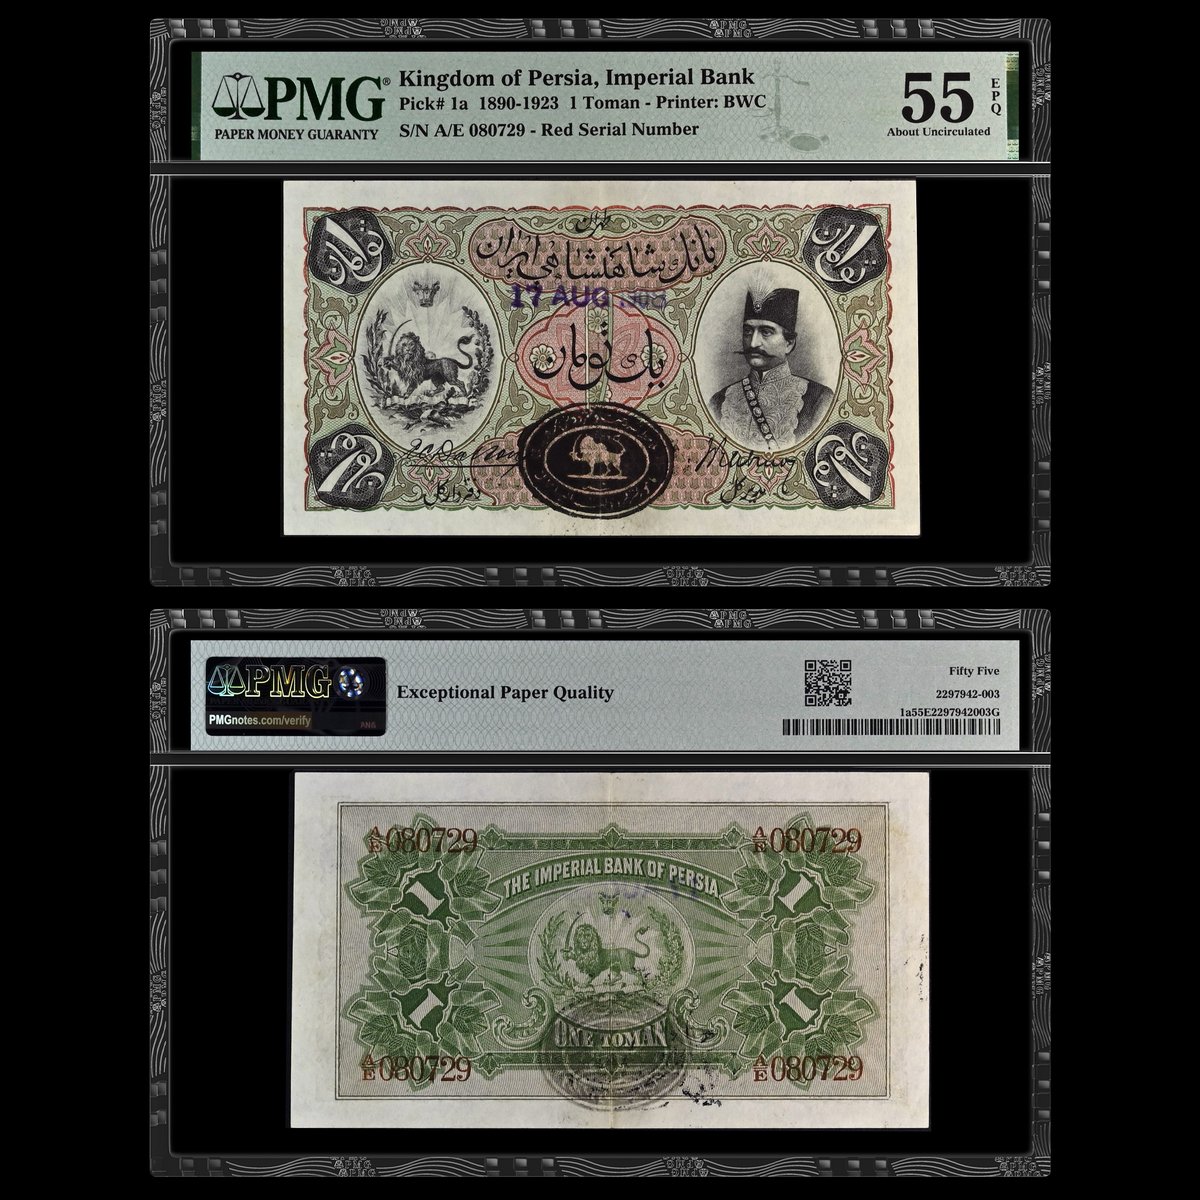 Note of the Day: Today’s featured banknote is this remarkable Kingdom of Persia, Imperial Bank 1890-1923 1 Toman graded PMG 55 About Uncirculated EPQ. Make sure to visit PMG social media every #ThrowbackThursday to check out more banknotes from the past!